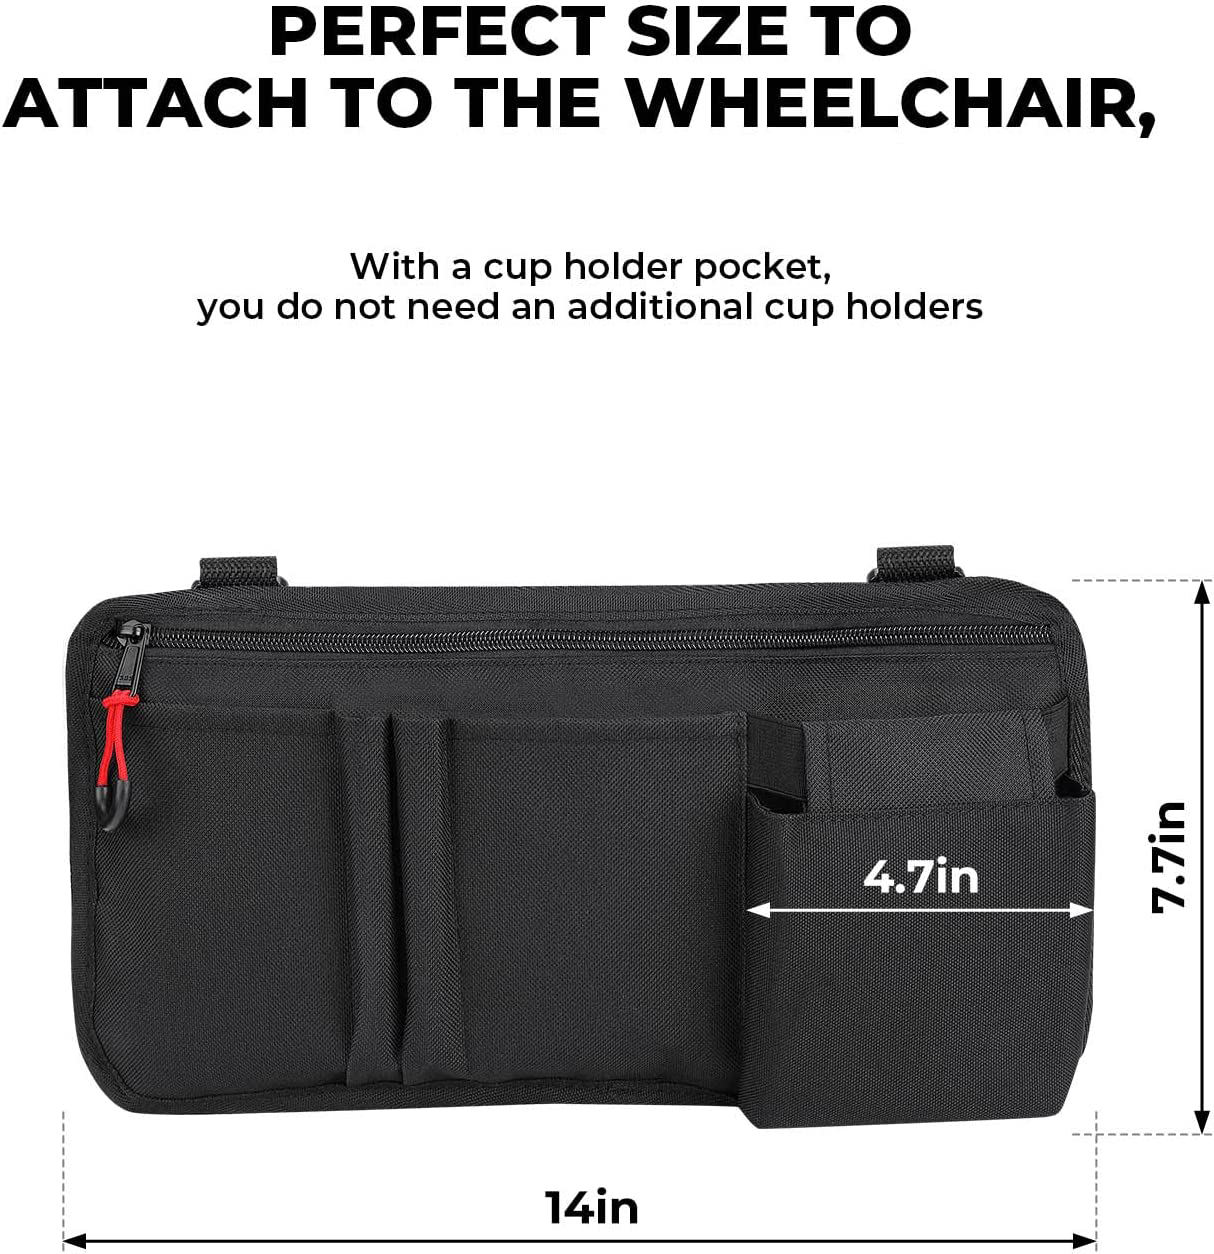 Durable Light Weight Waterproof Oxford Fabric Wheelchair Side Bag Walker Pouch Bag Organizer With Cup Holder